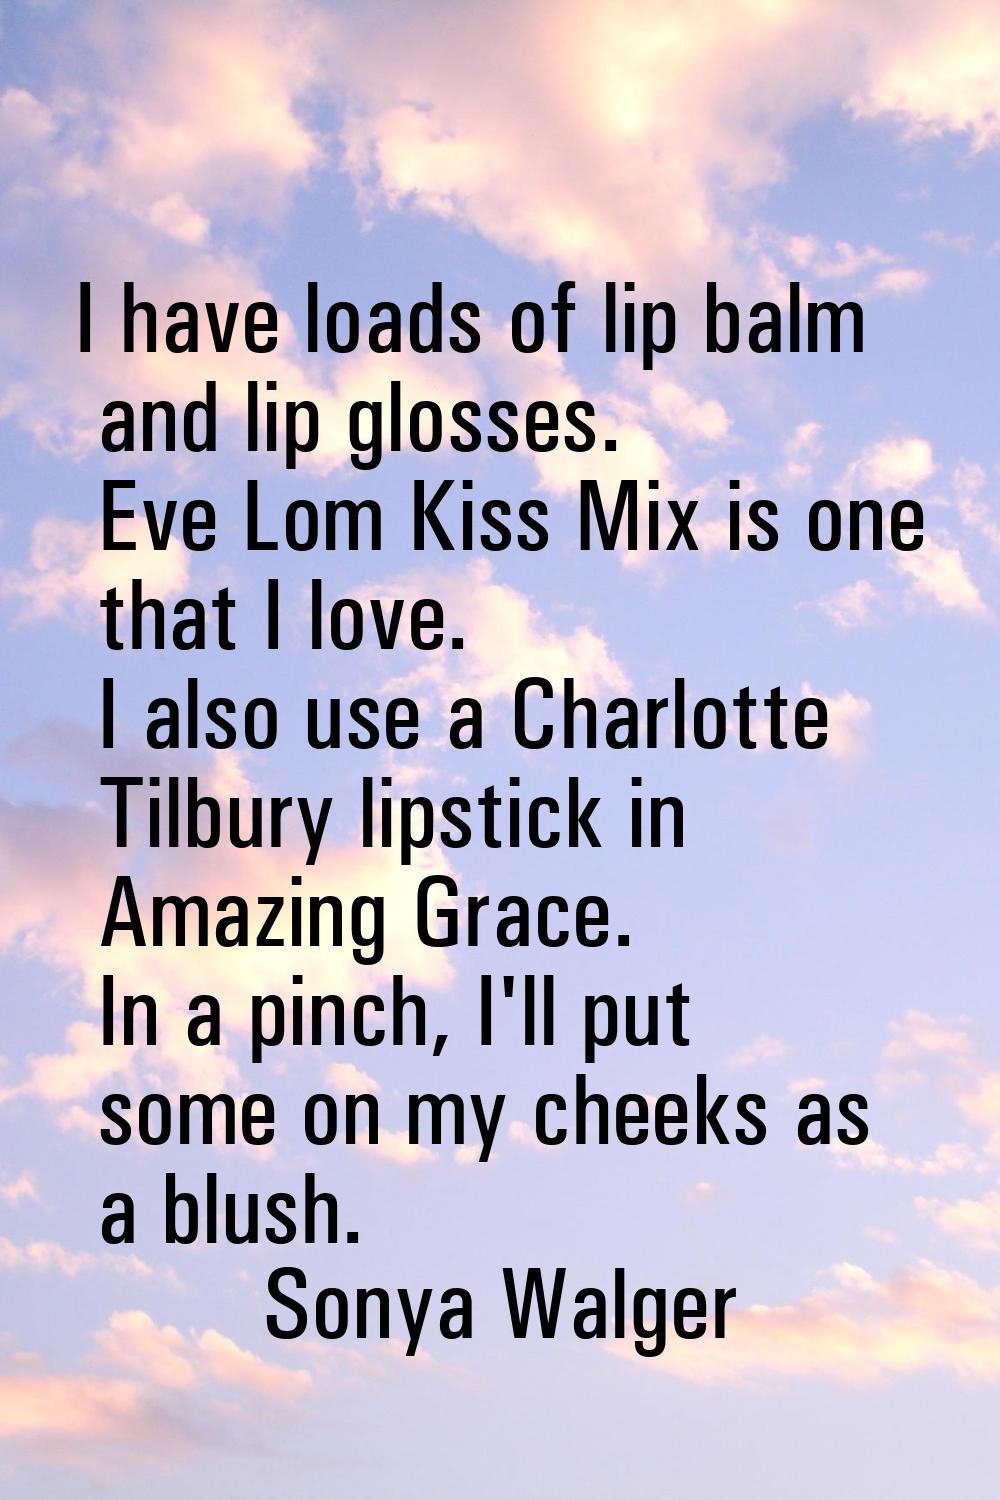 I have loads of lip balm and lip glosses. Eve Lom Kiss Mix is one that I love. I also use a Charlot